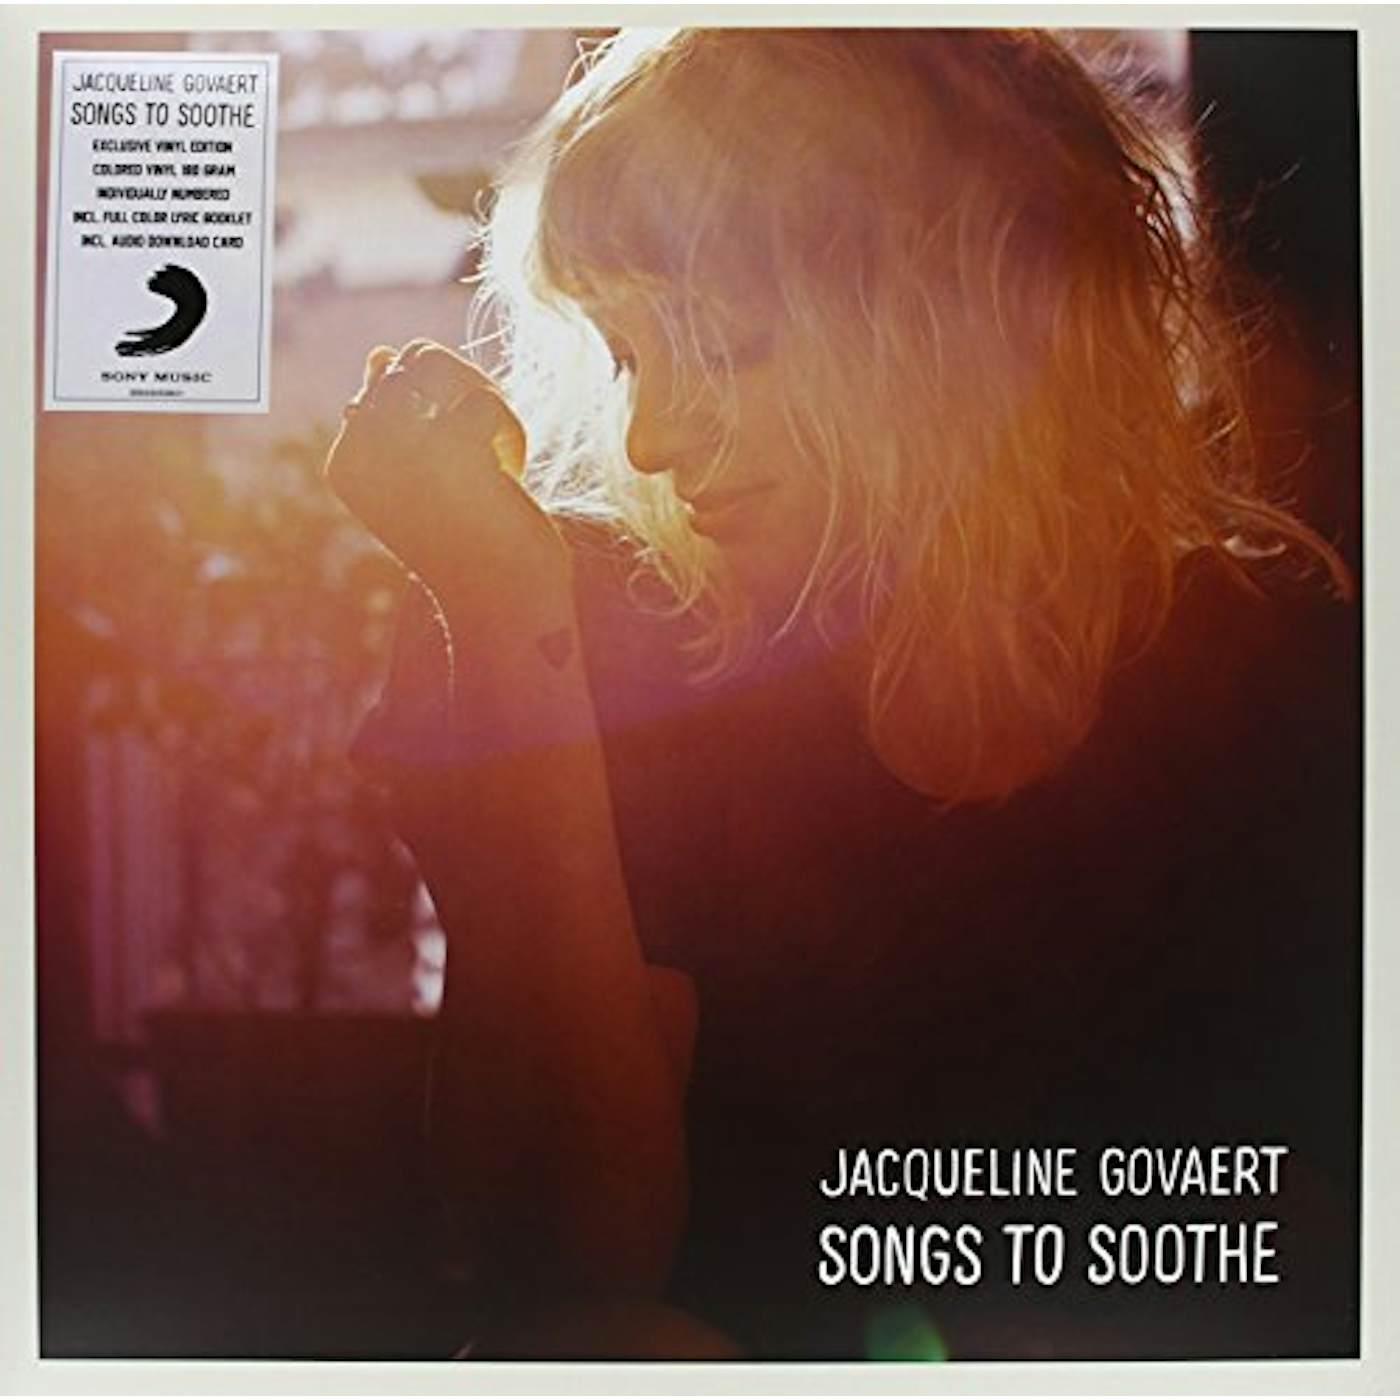 Jacqueline Govaert Songs to Soothe Vinyl Record